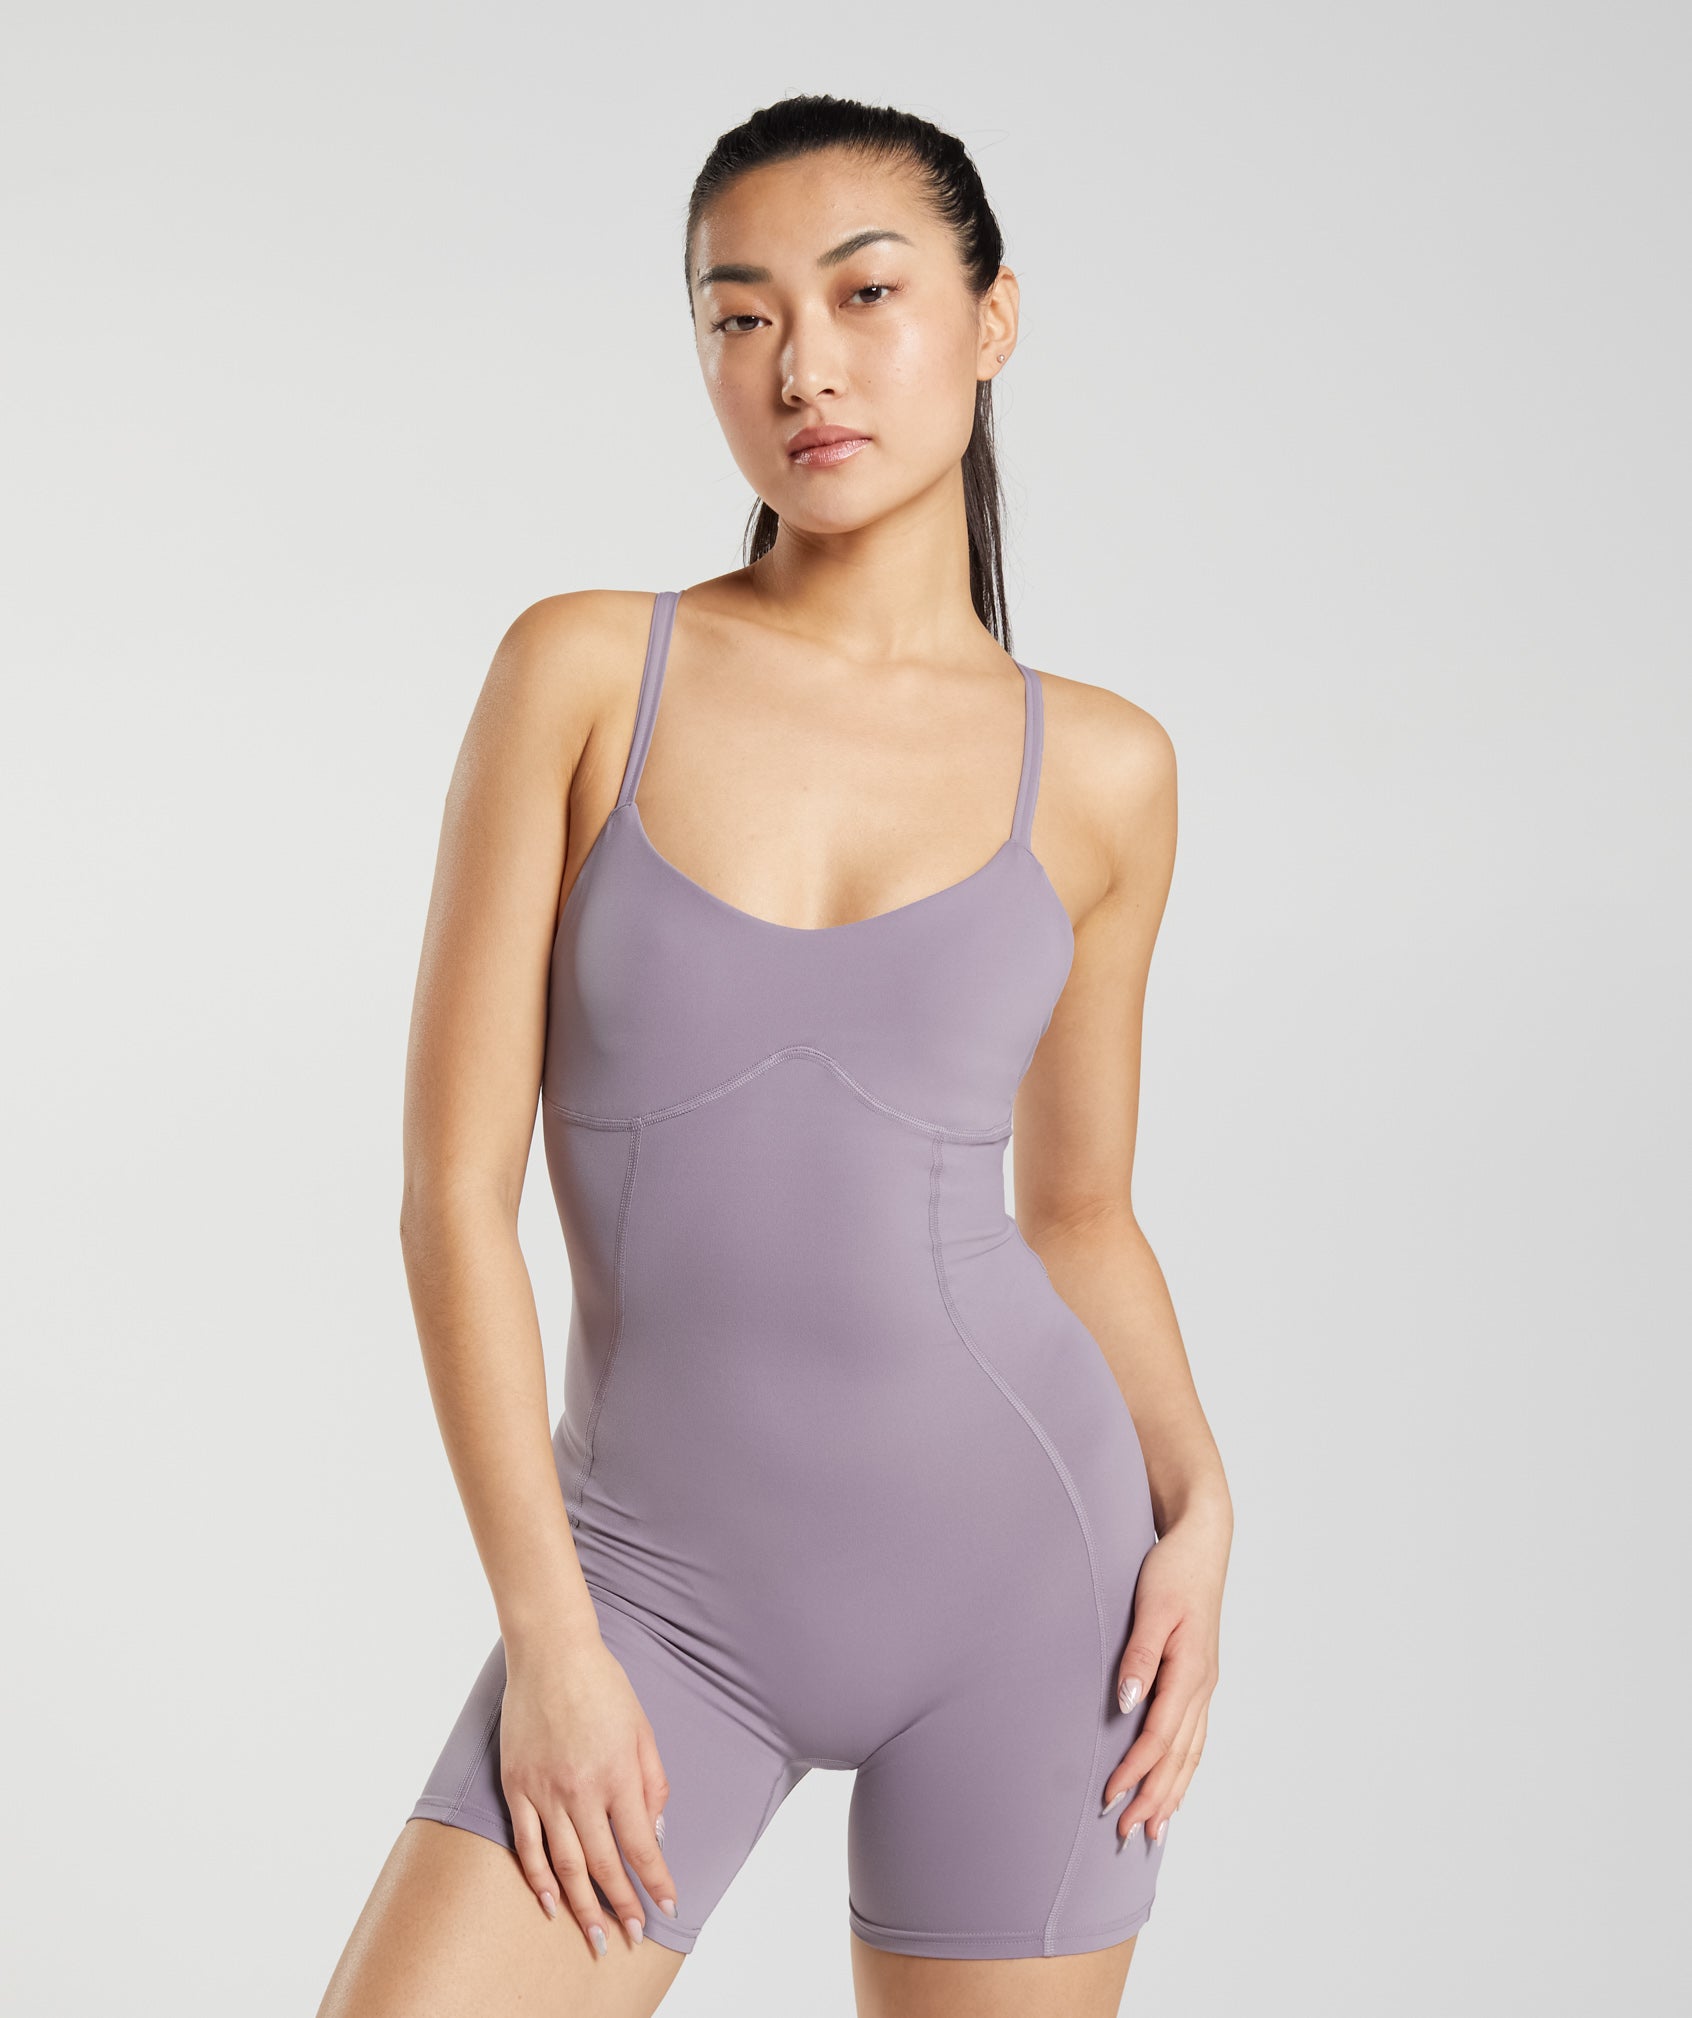 Gymshark Strappy All In One - Slate Lavender